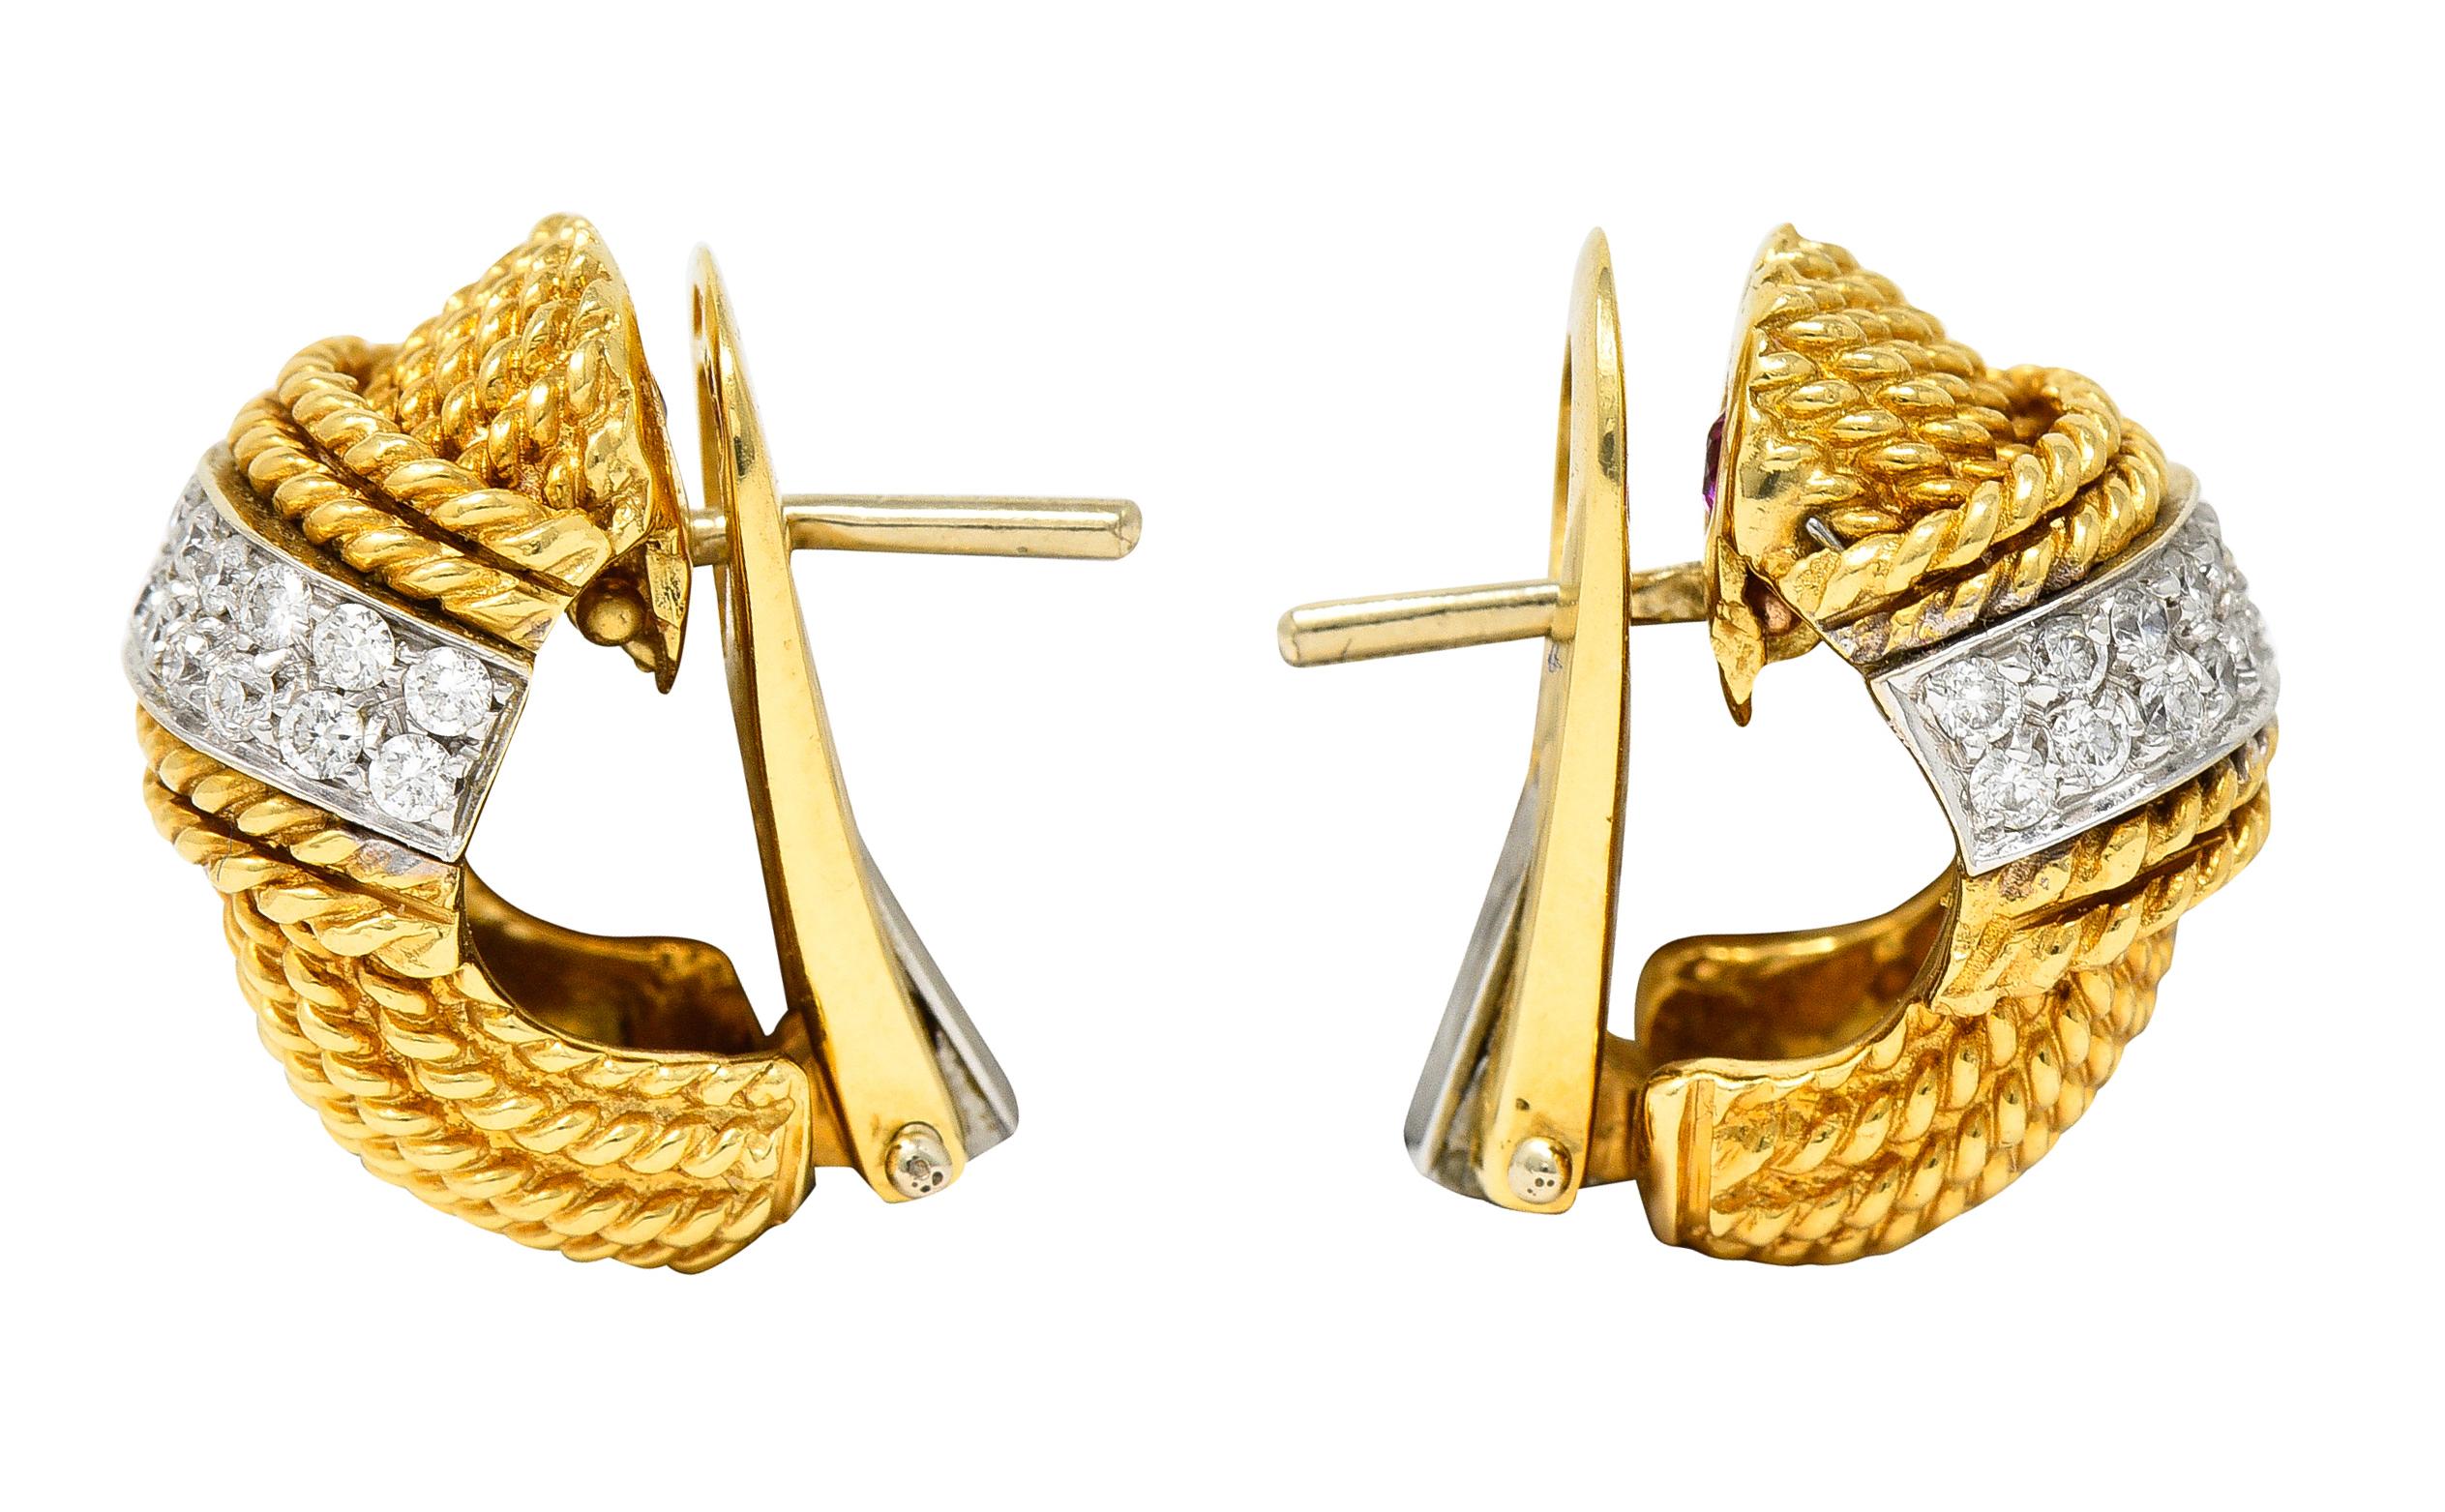 Yellow gold J hoop earrings are comprised of segments of twisted rope motif

With a white gold band oriented East to West - pavè set with round brilliant cut diamonds

Weighing in total approximately 0.75 carat - G/H color with SI clarity

Completed